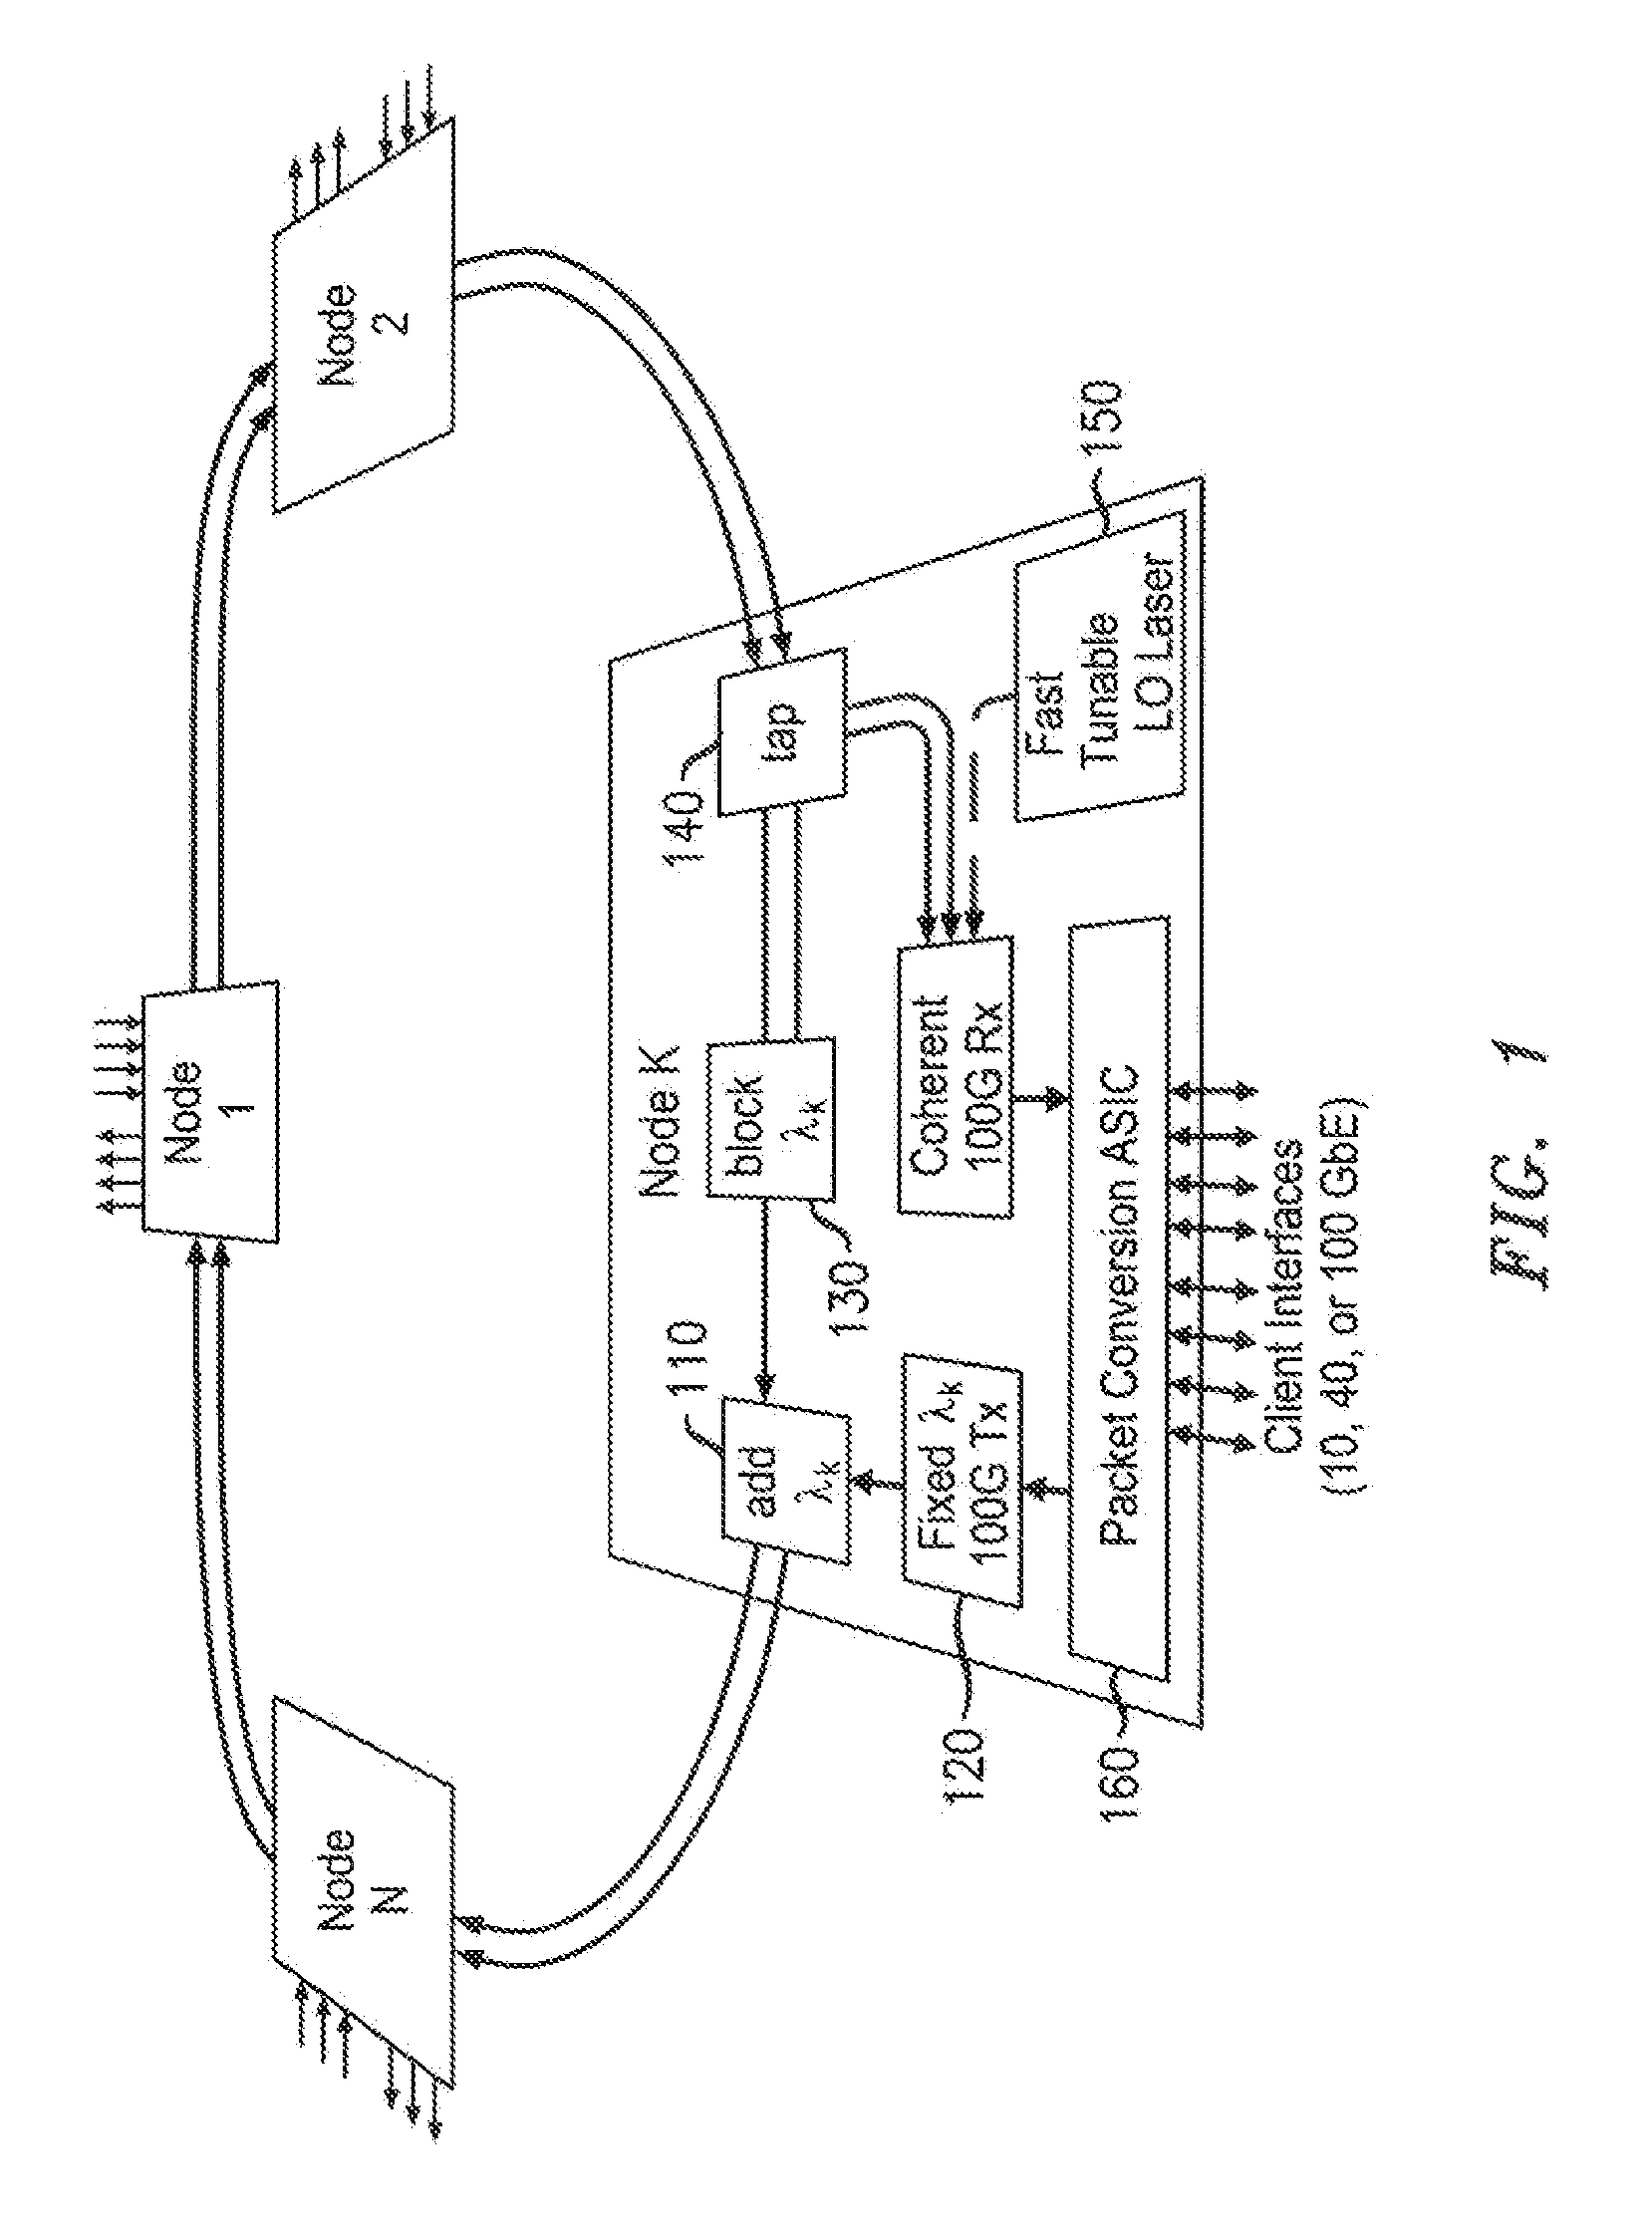 Tunable Receiver